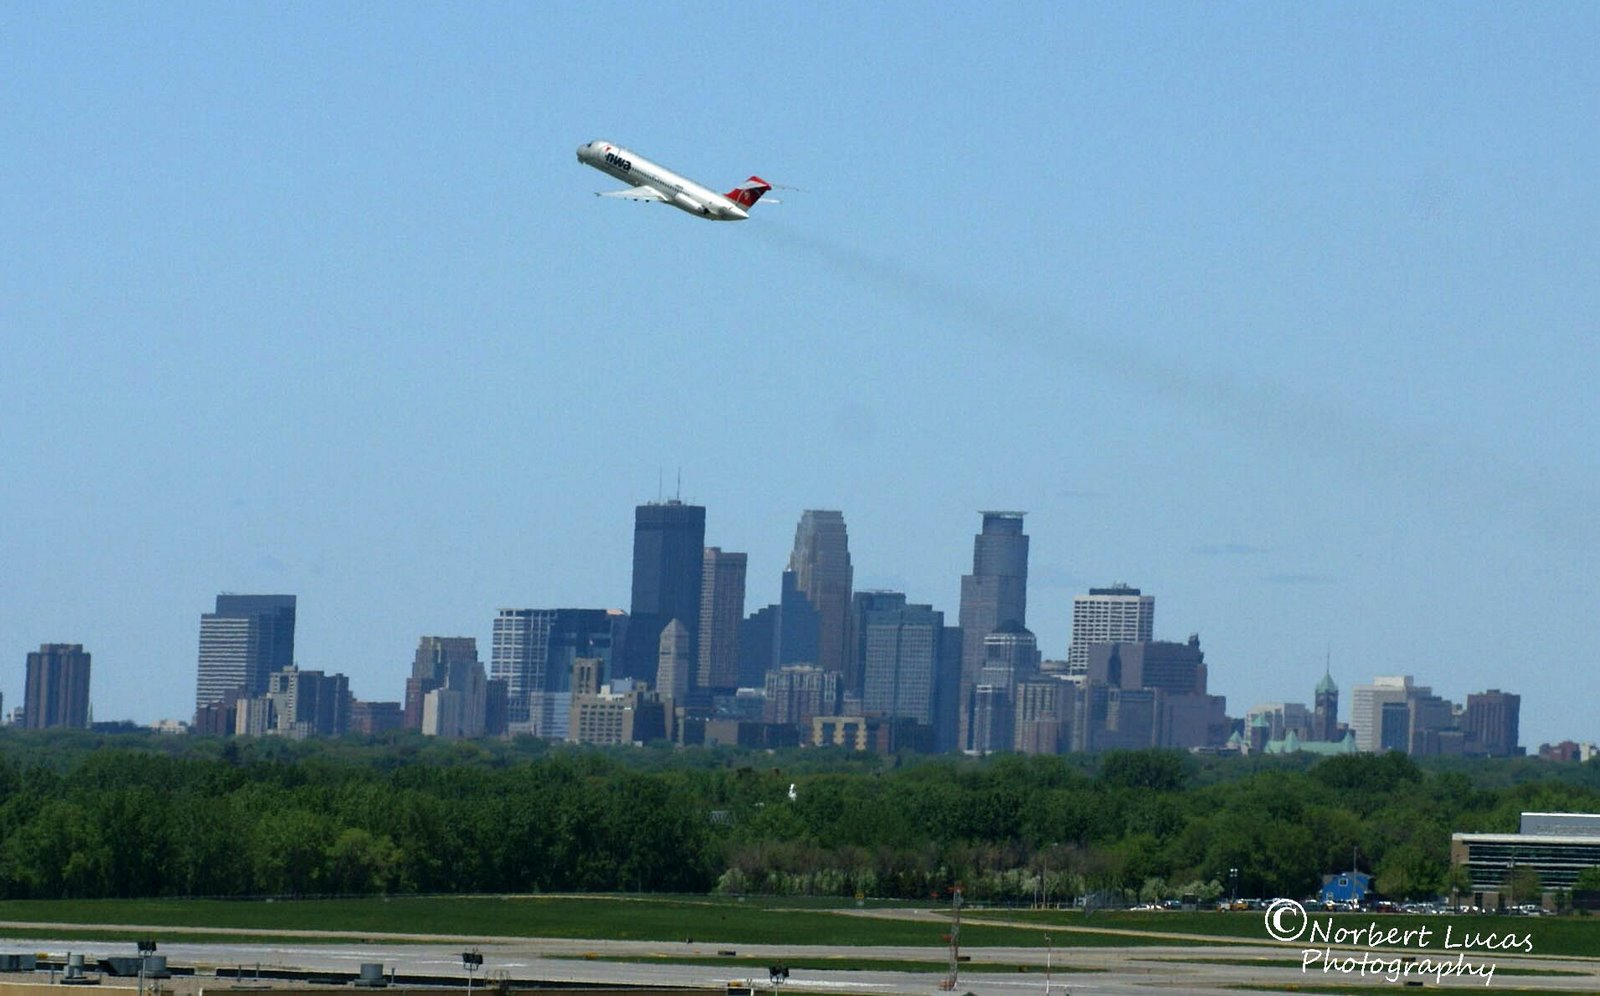 [Airplane+in+front+of+city.jpg]